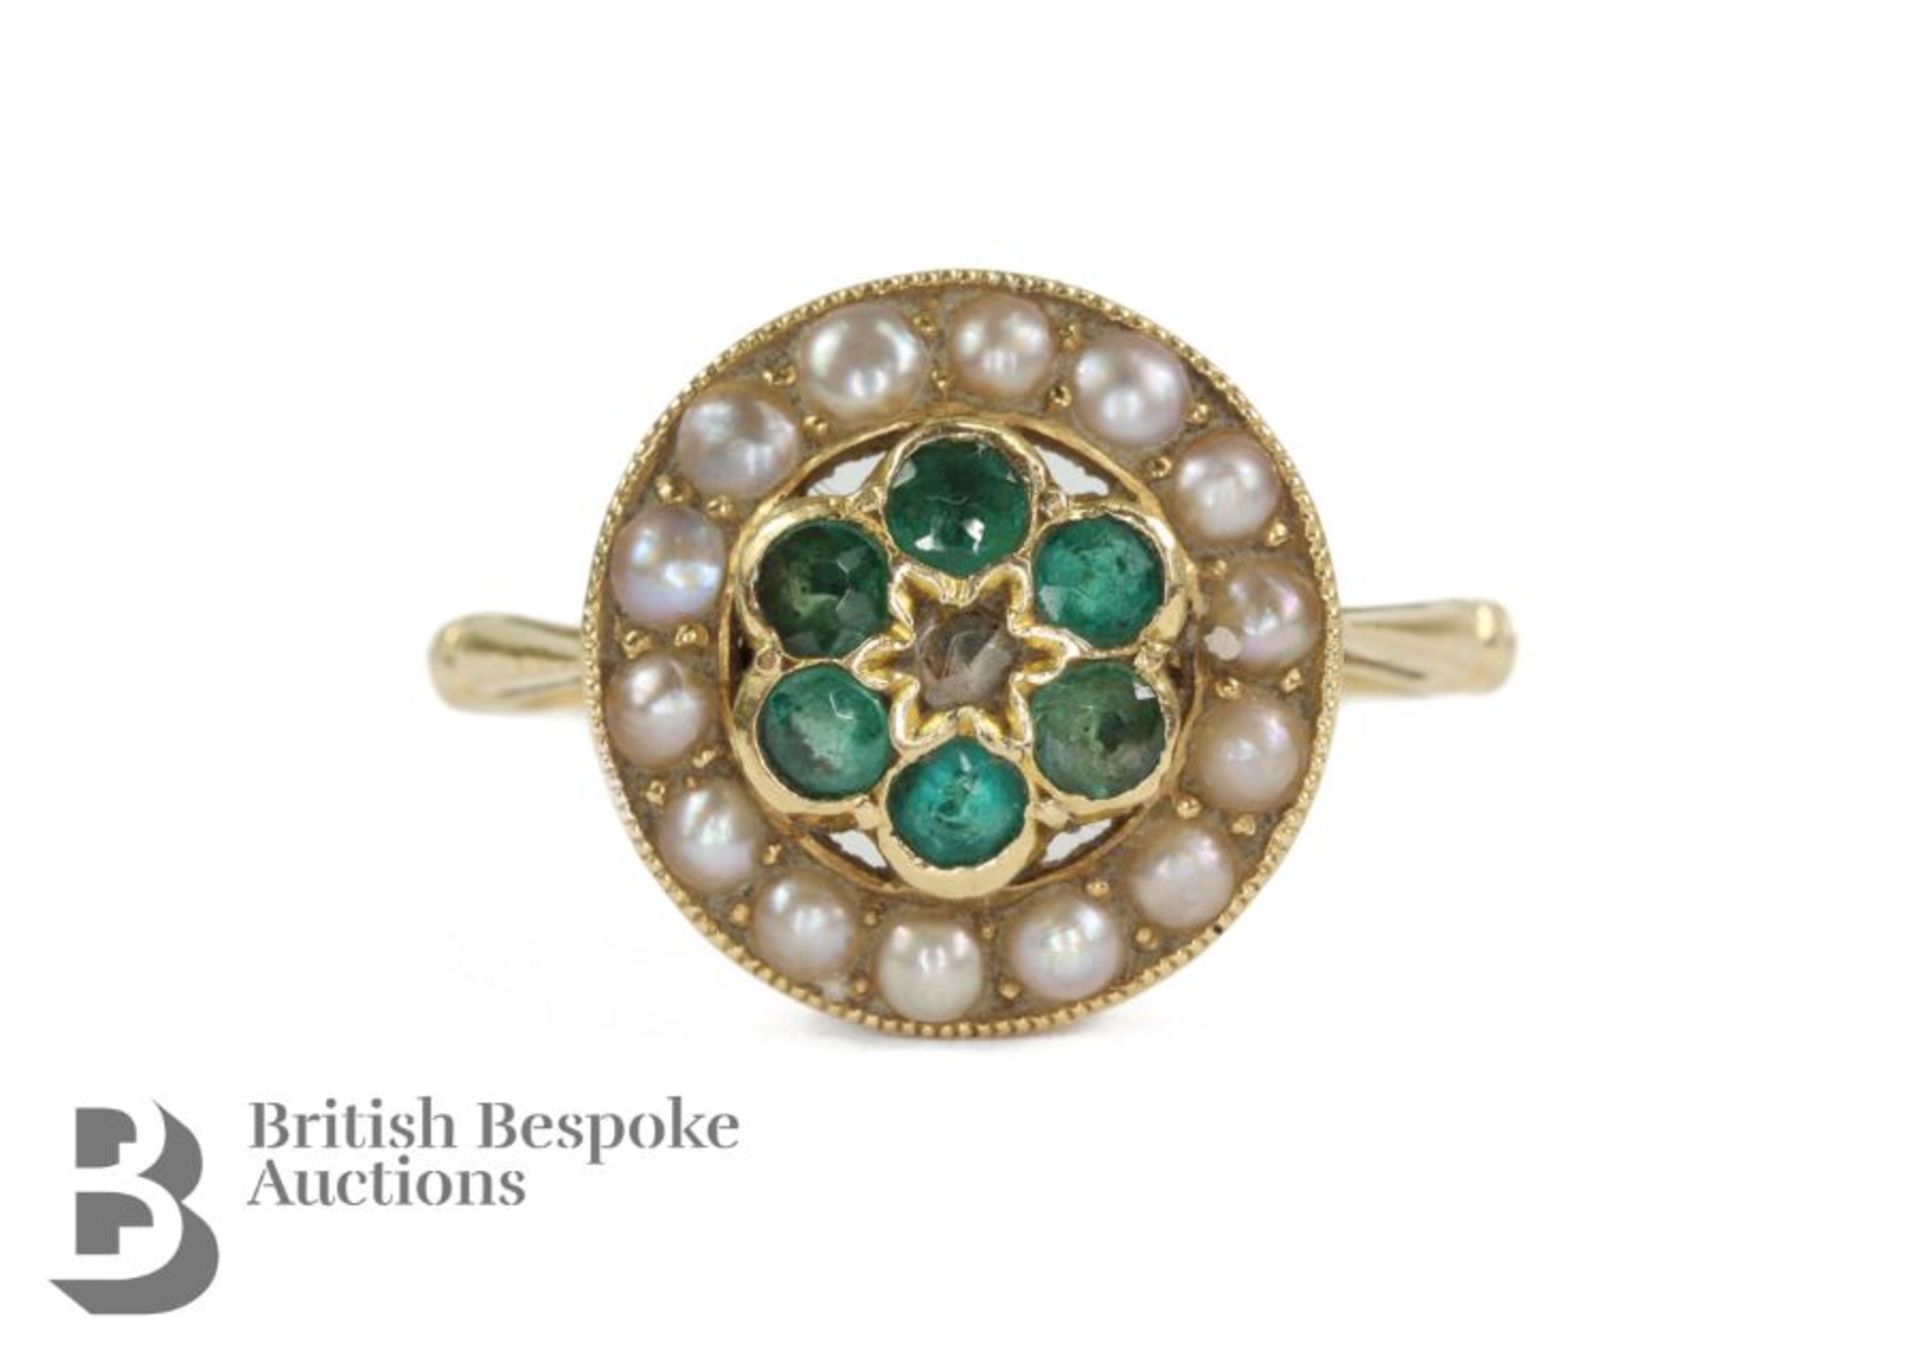 19th Century 18ct Gold Diamond, Emerald and Pearl Ring - Image 5 of 5